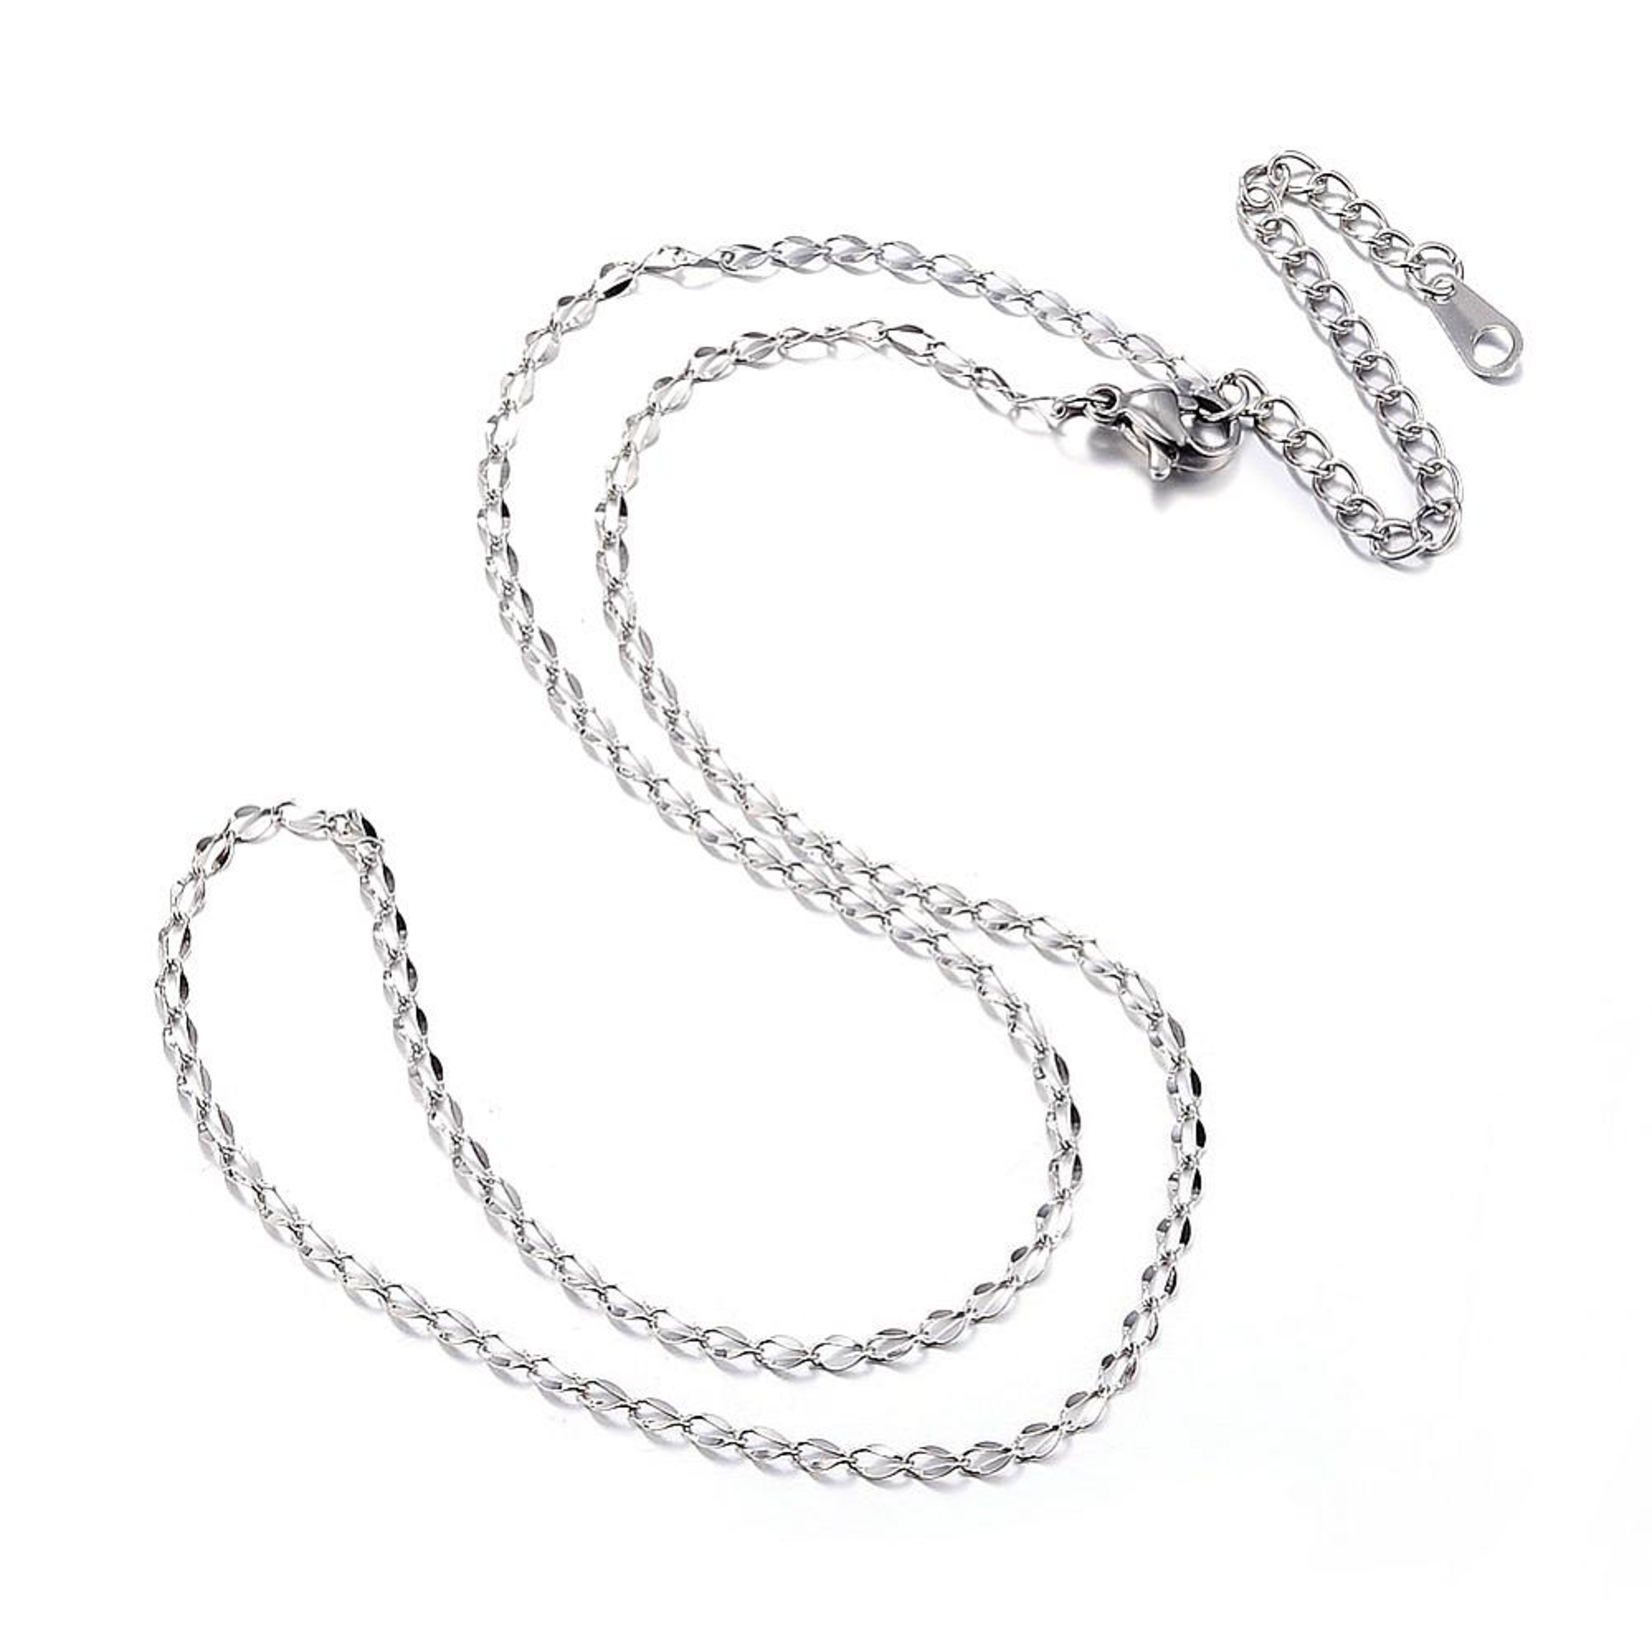 Fashion Jewelry STAINLESS 2MM ROLO CHAIN FJN34-18